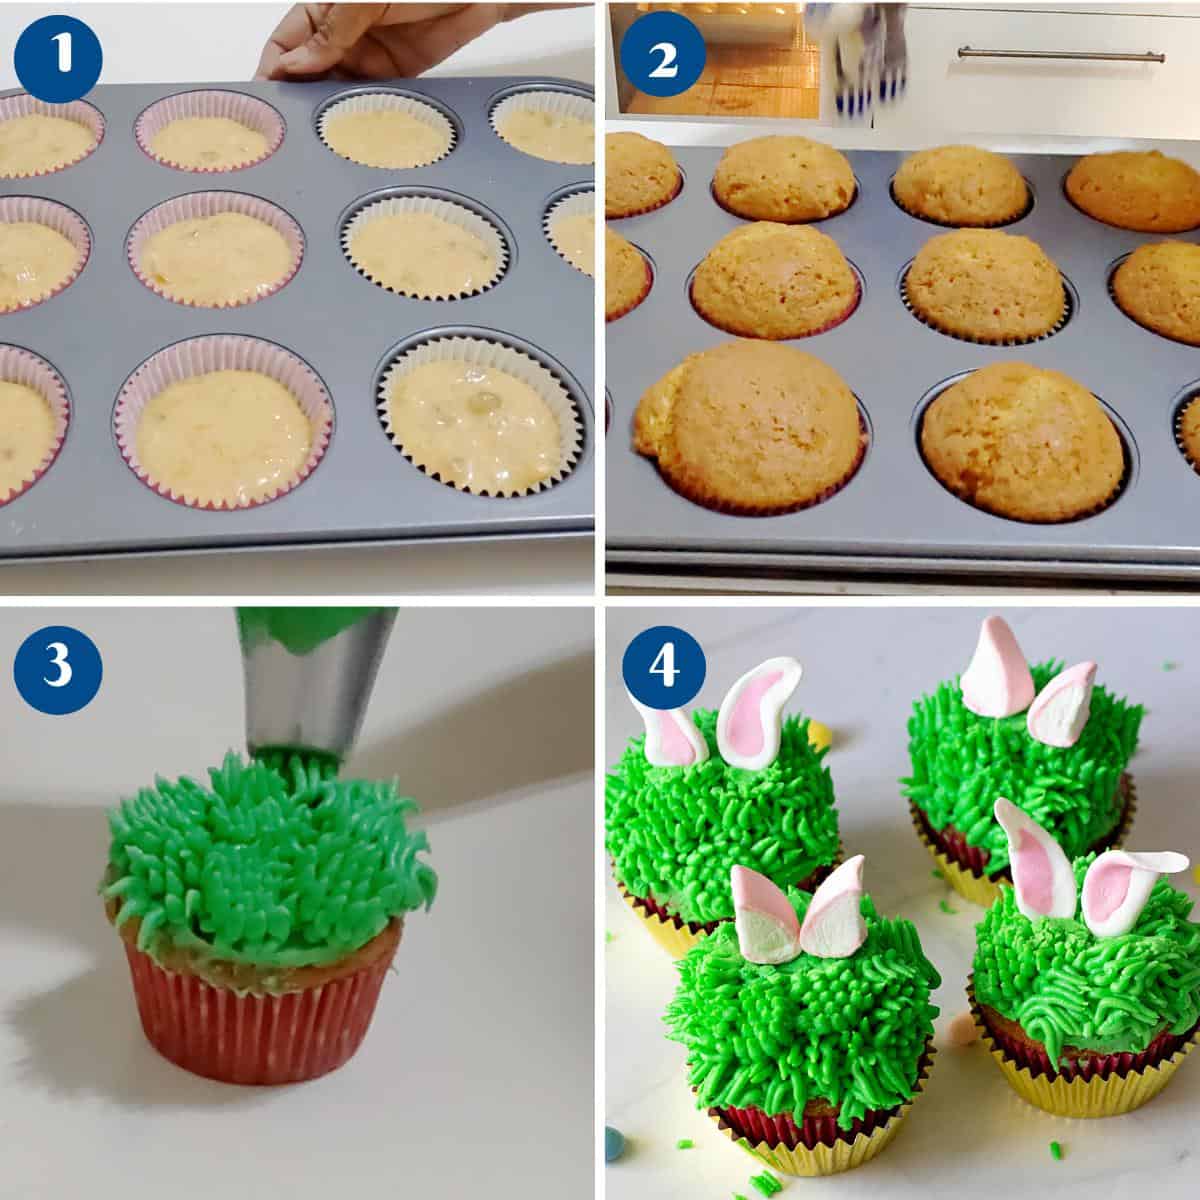 Progress pictures for making bunny cucakes.